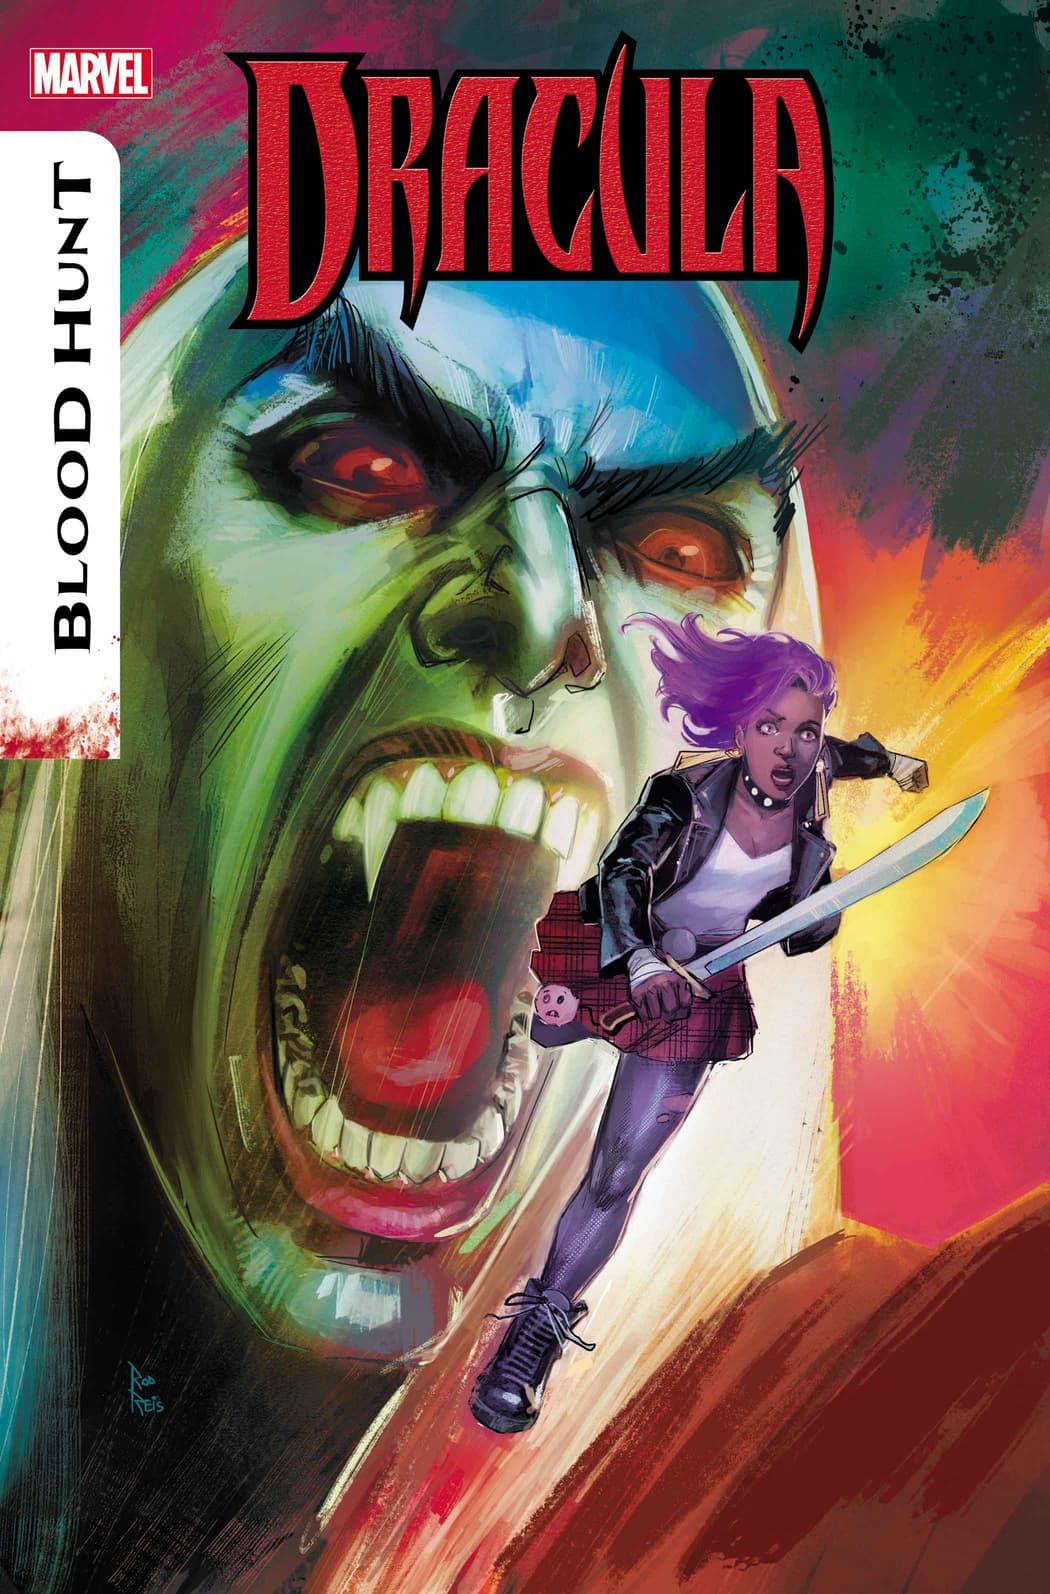 DRACULA: BLOOD HUNT #1 cover by Rod Reis